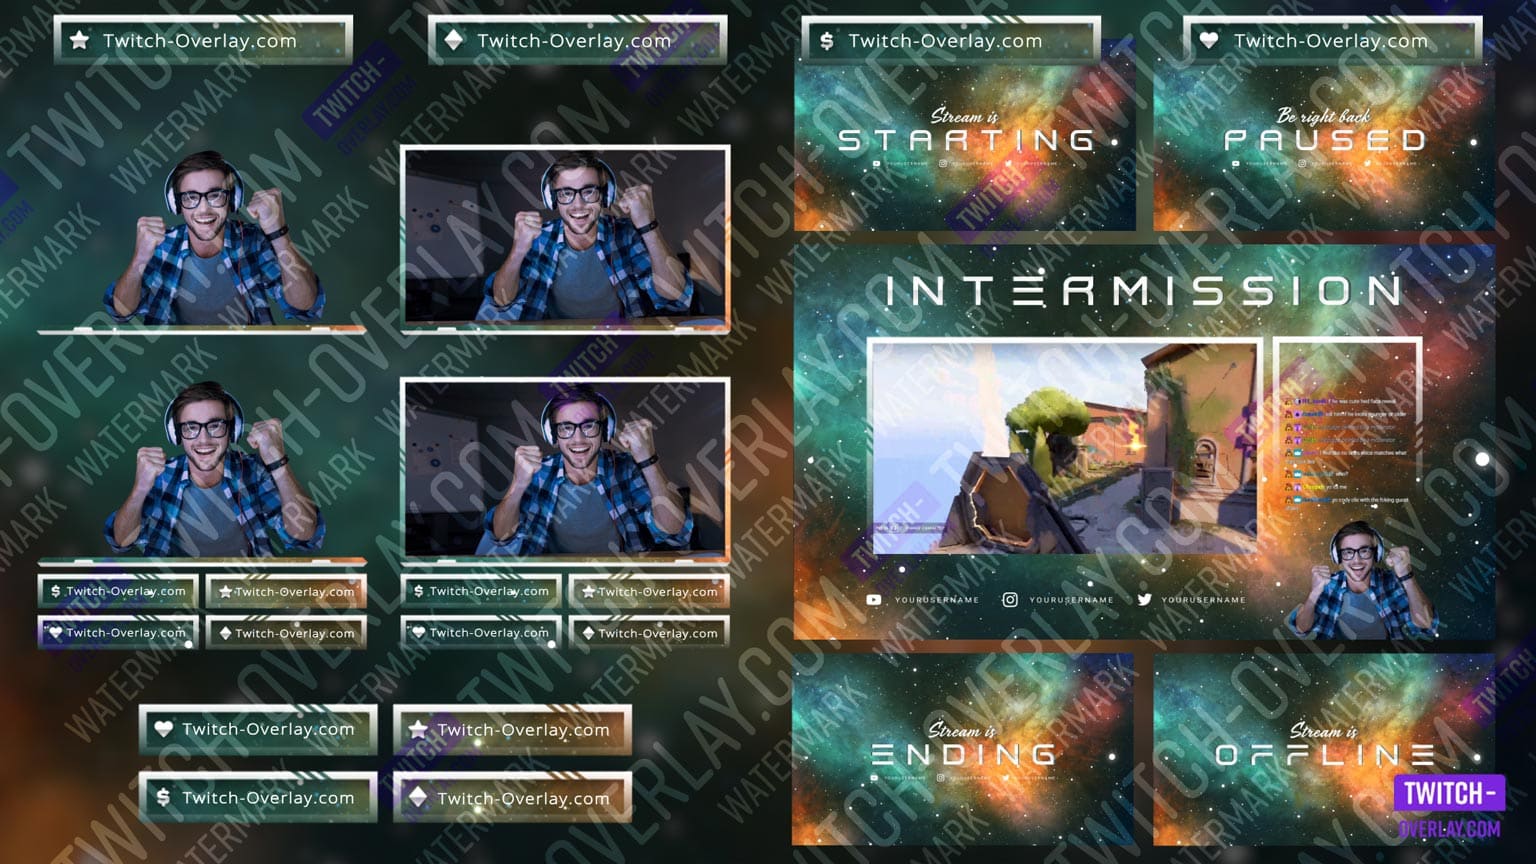 All Overlay and Screen files included in the Nebula Galaxy Stream Bundle for Twitch, Facebook and YouTube Streams